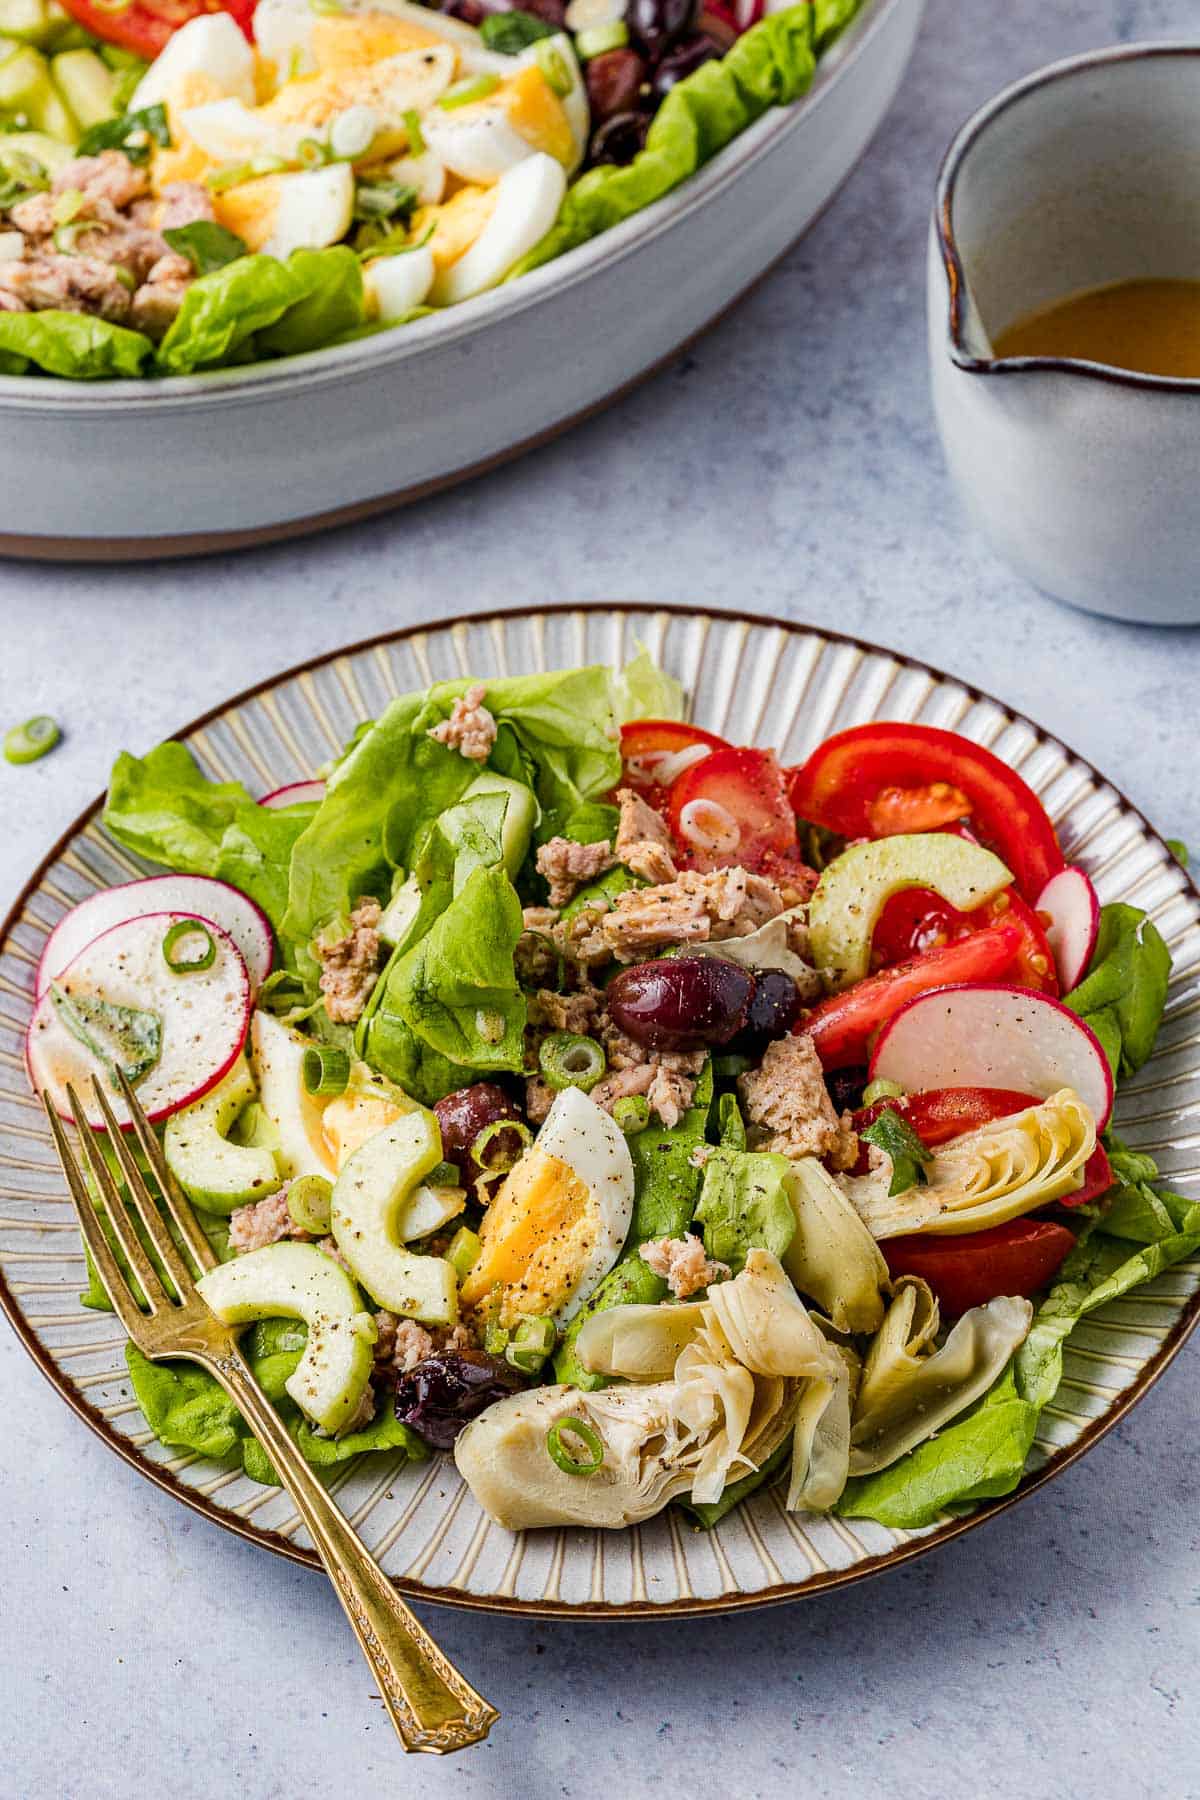 a serving of nicoise salad on a plate with a fork, next to a cup of salad dressing and an entire nicoise salad in a serving bowl.